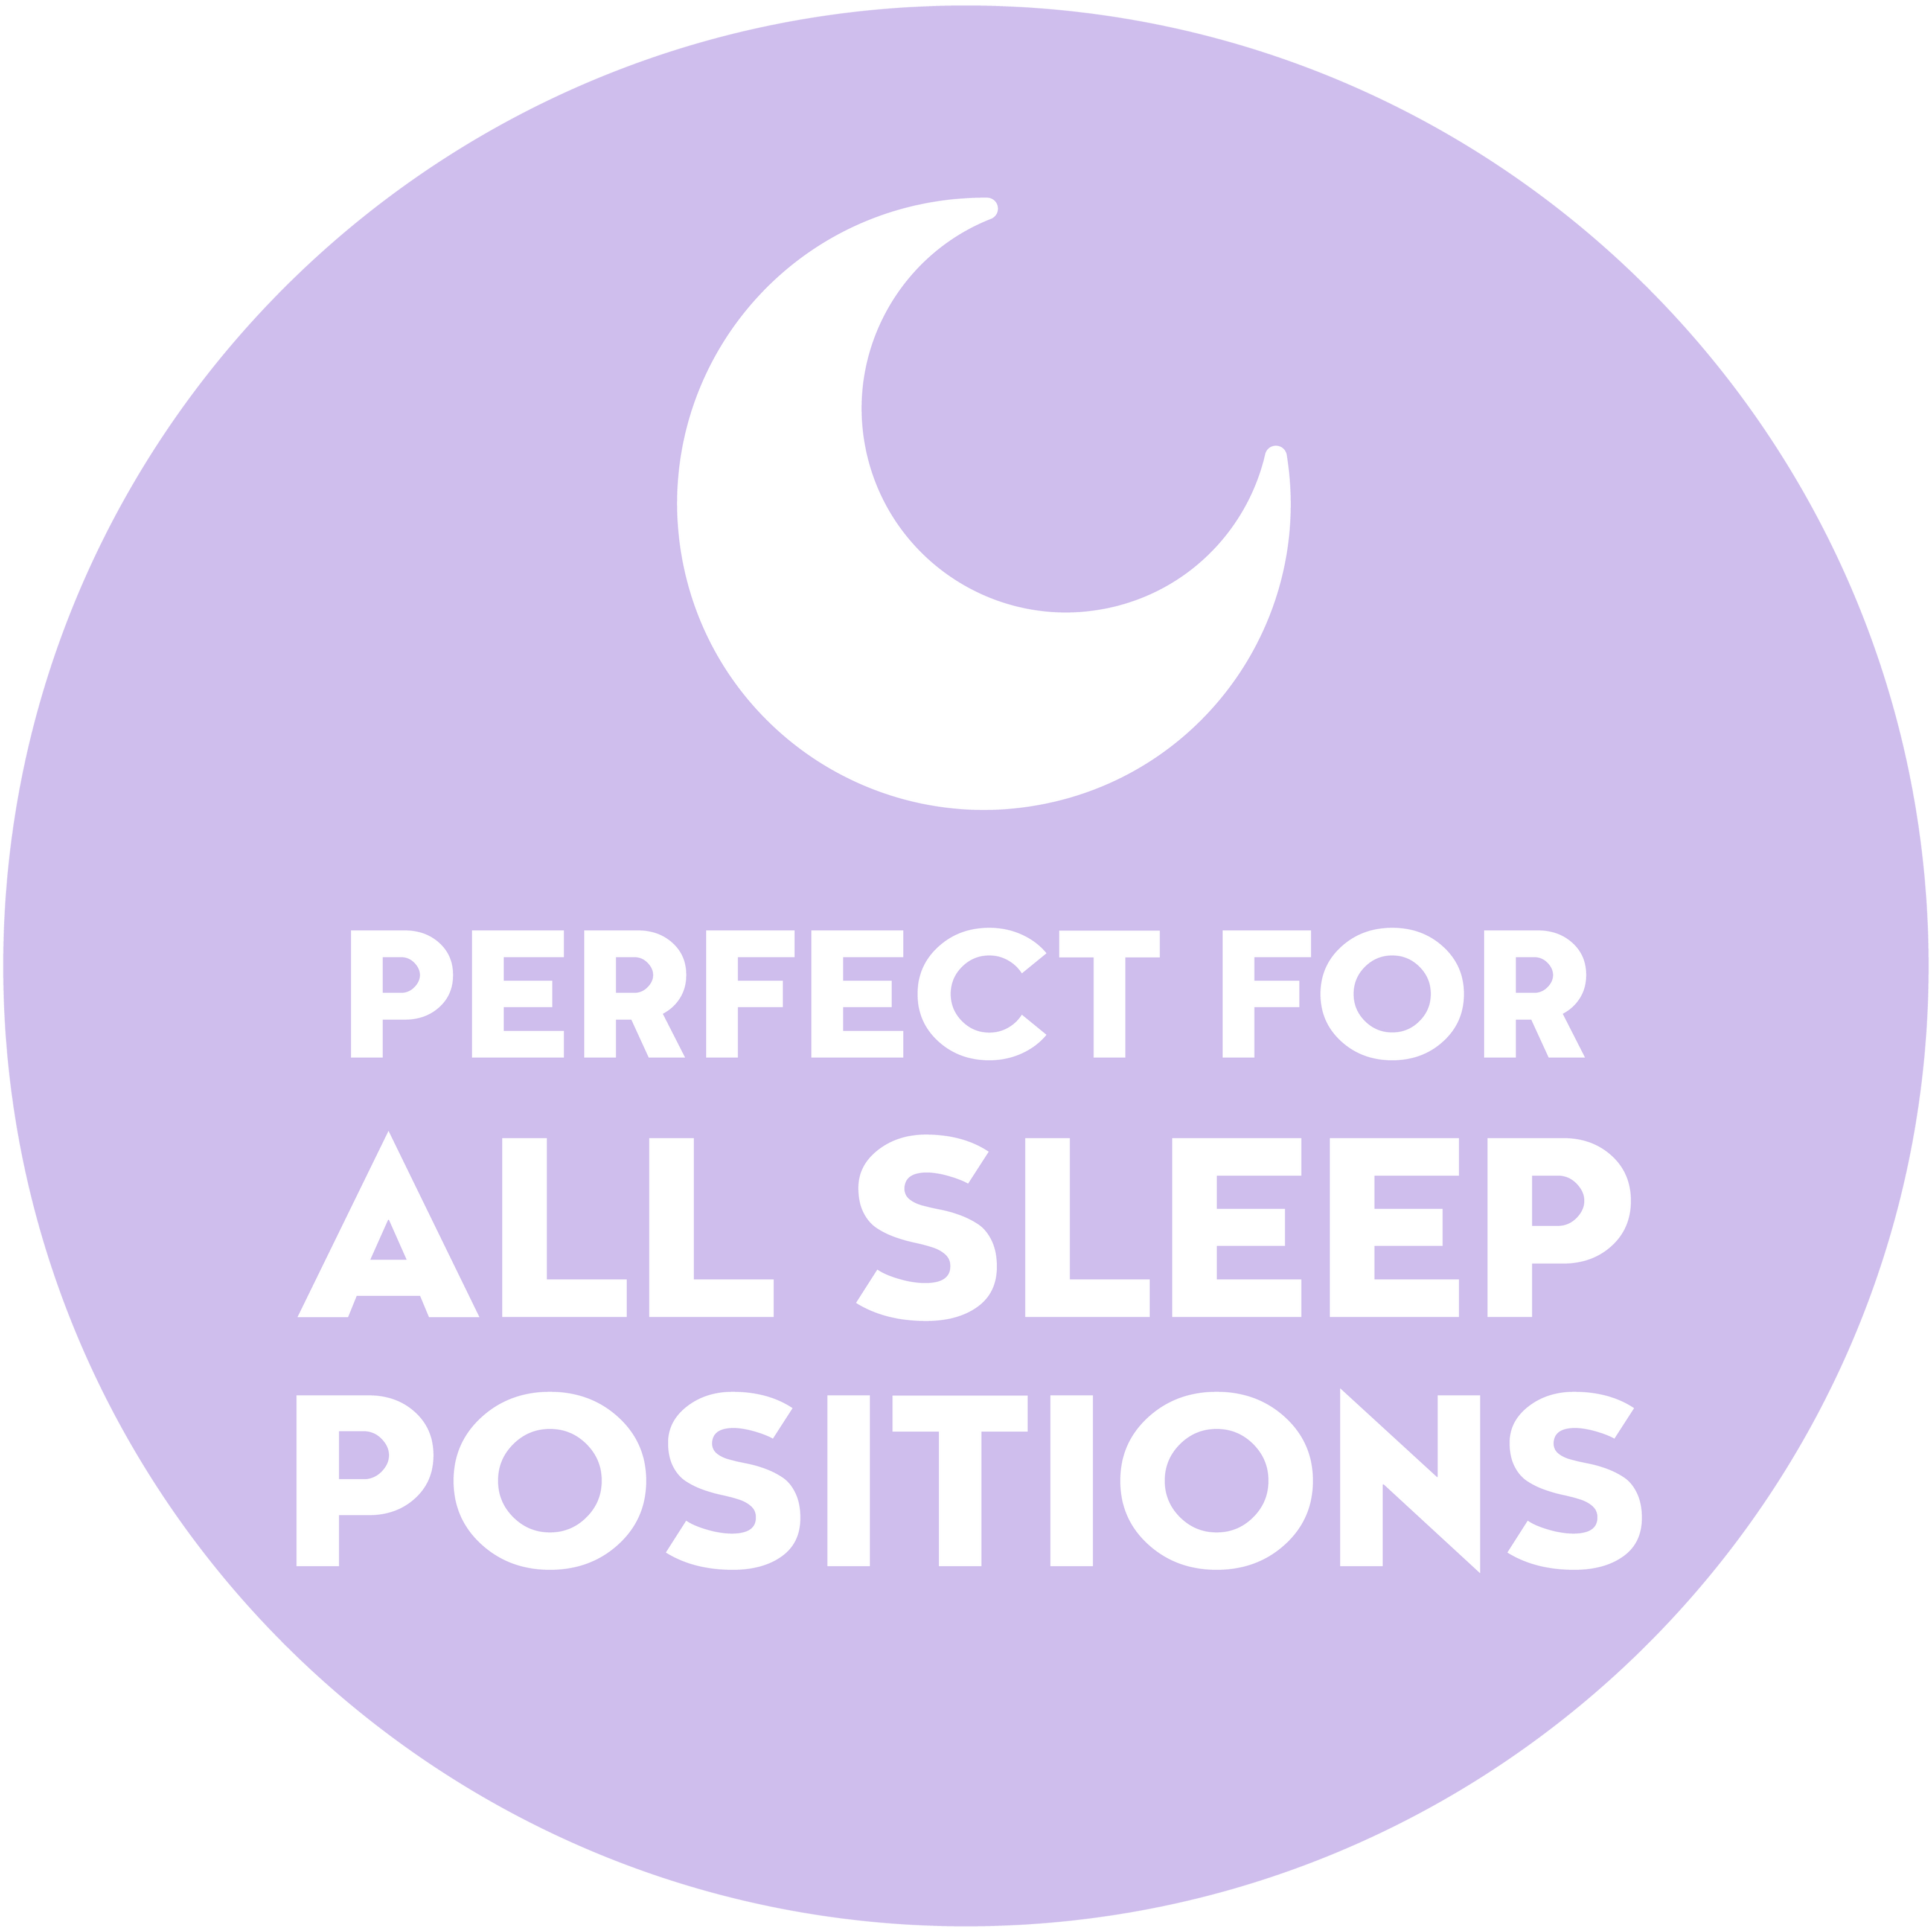 Perfect for all sleep positions